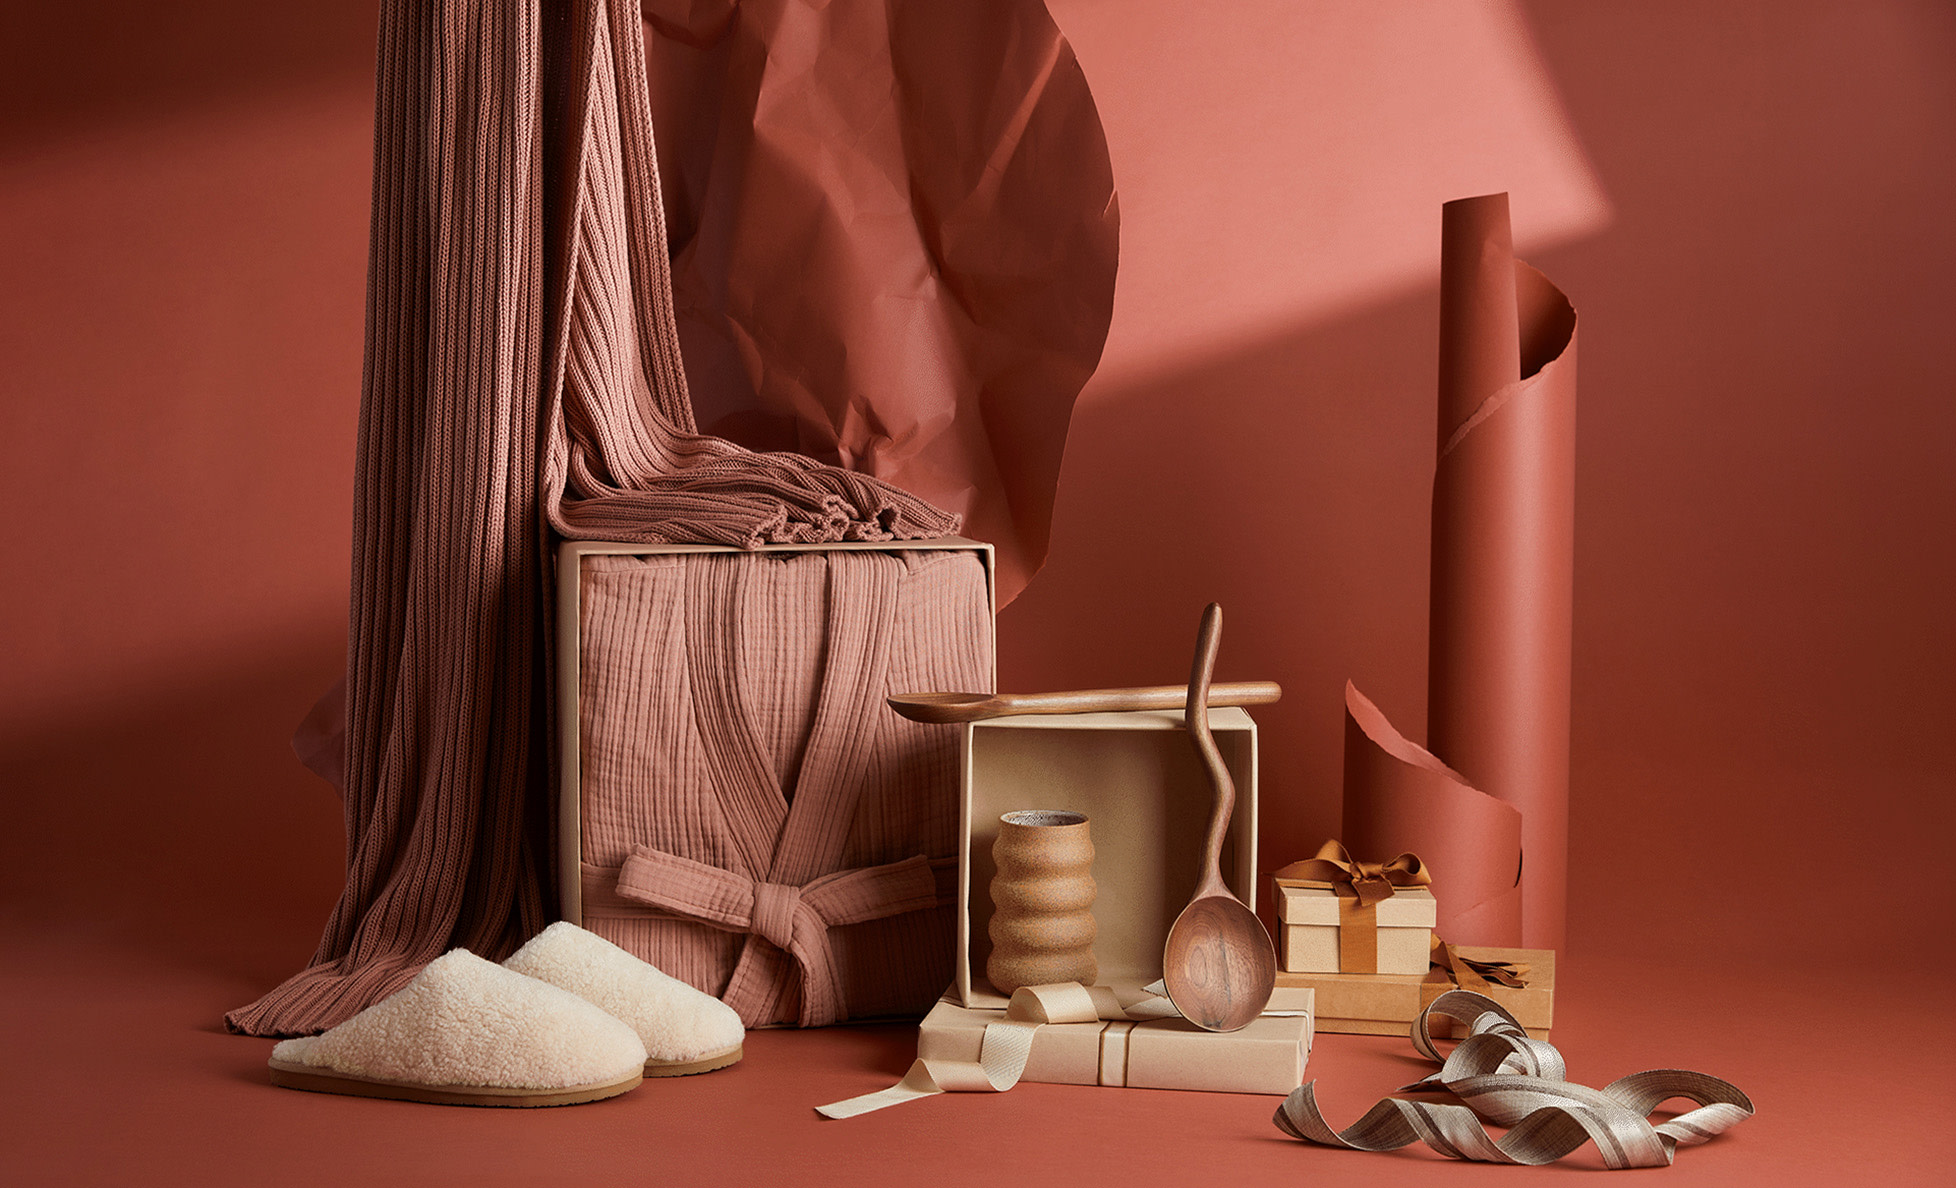 An assortment of giftable items: robes, slippers, vases, throw blankets, and decorative wooden spoons against a dusty red background